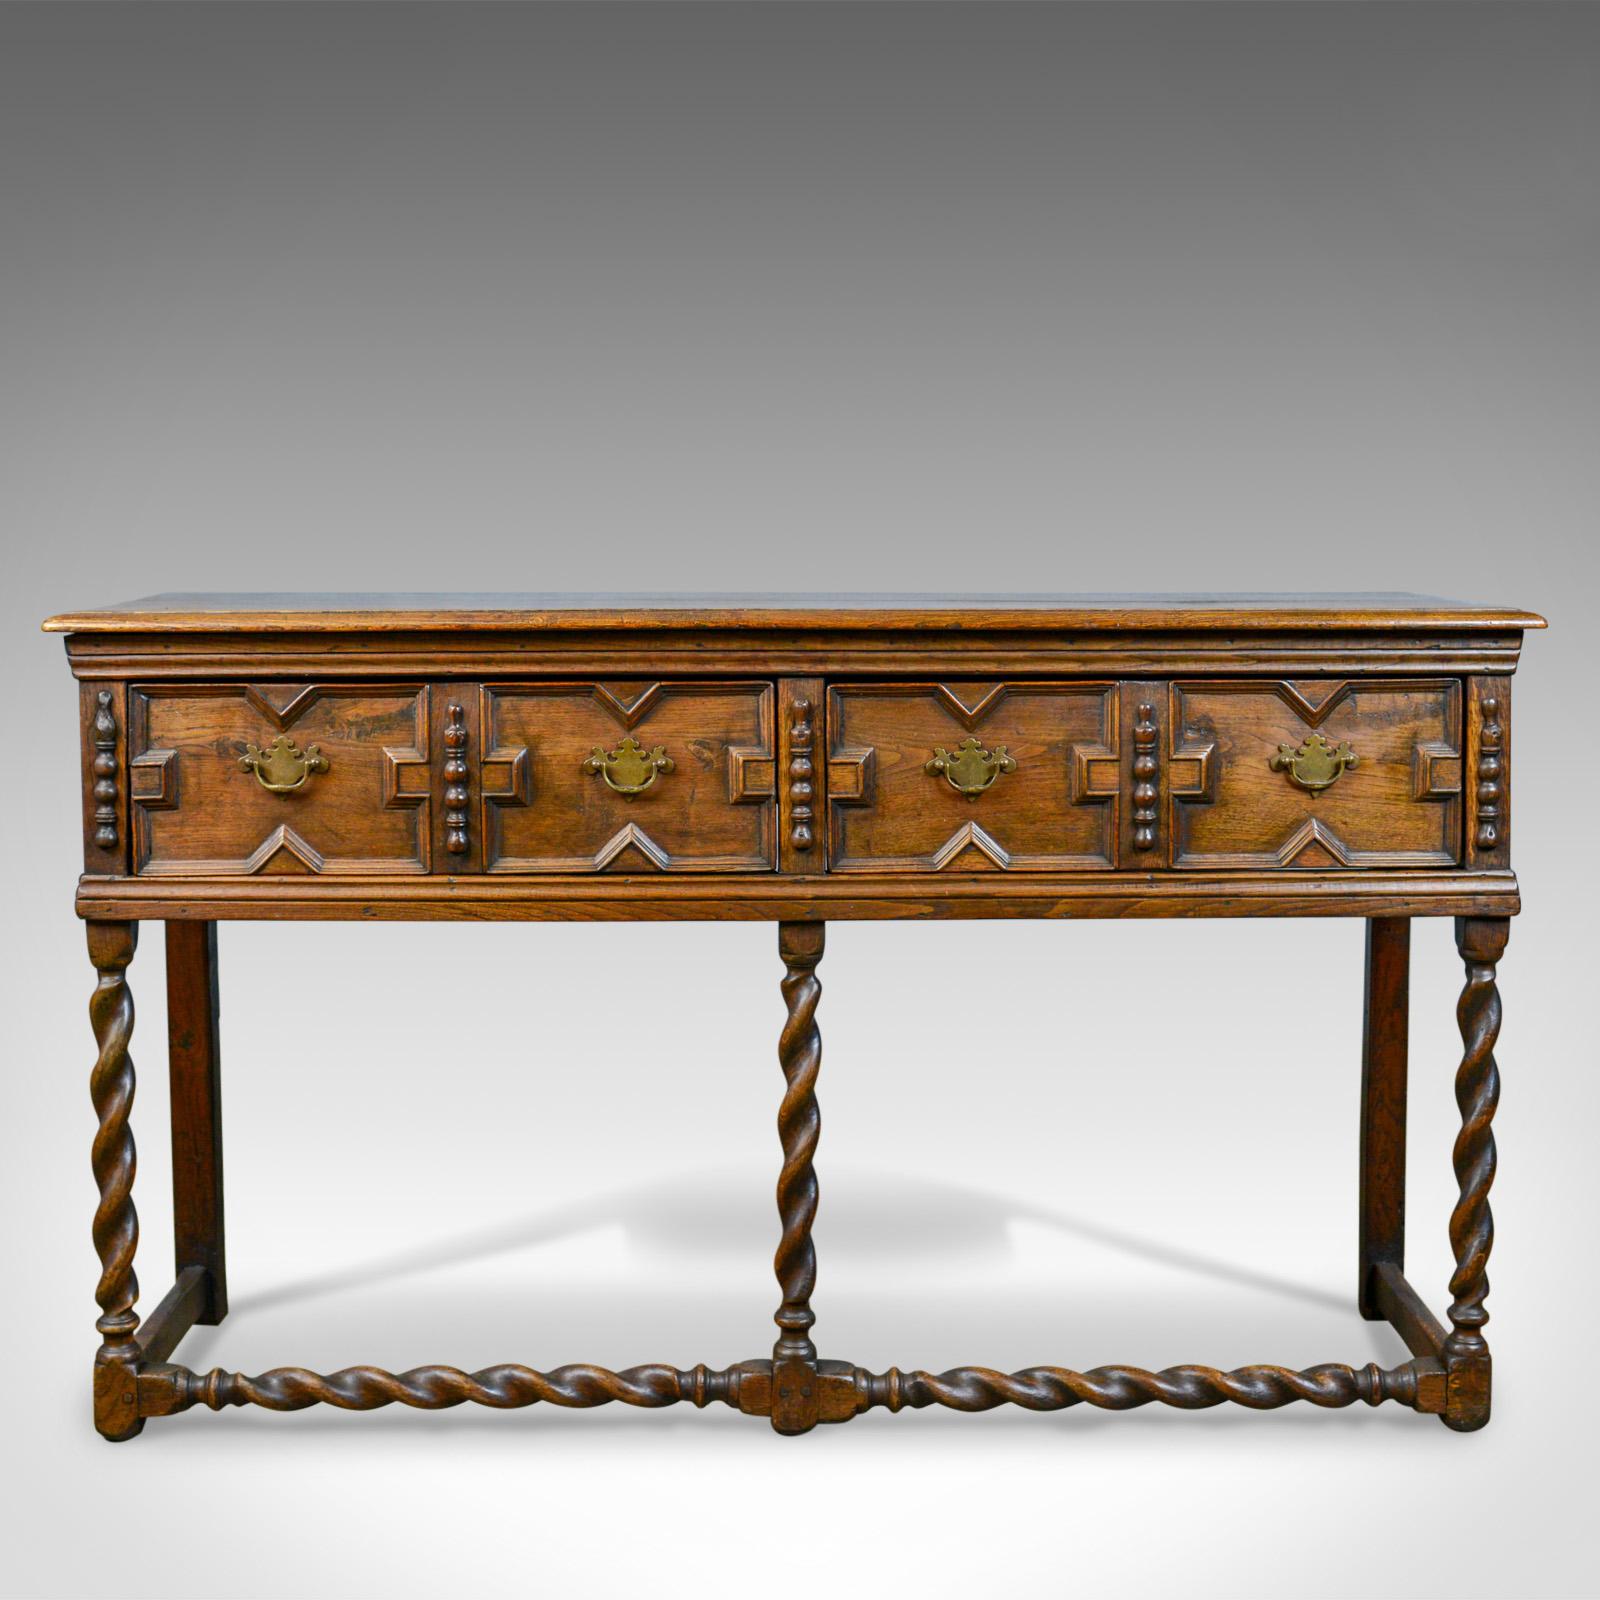 This is an antique dresser base from the early 18th century. An English, oak sideboard dating to circa 1700.

Solidly constructed in oak with desirable color and patina
Displaying wisps of medullary rays in the lustrous wax polished finish
In